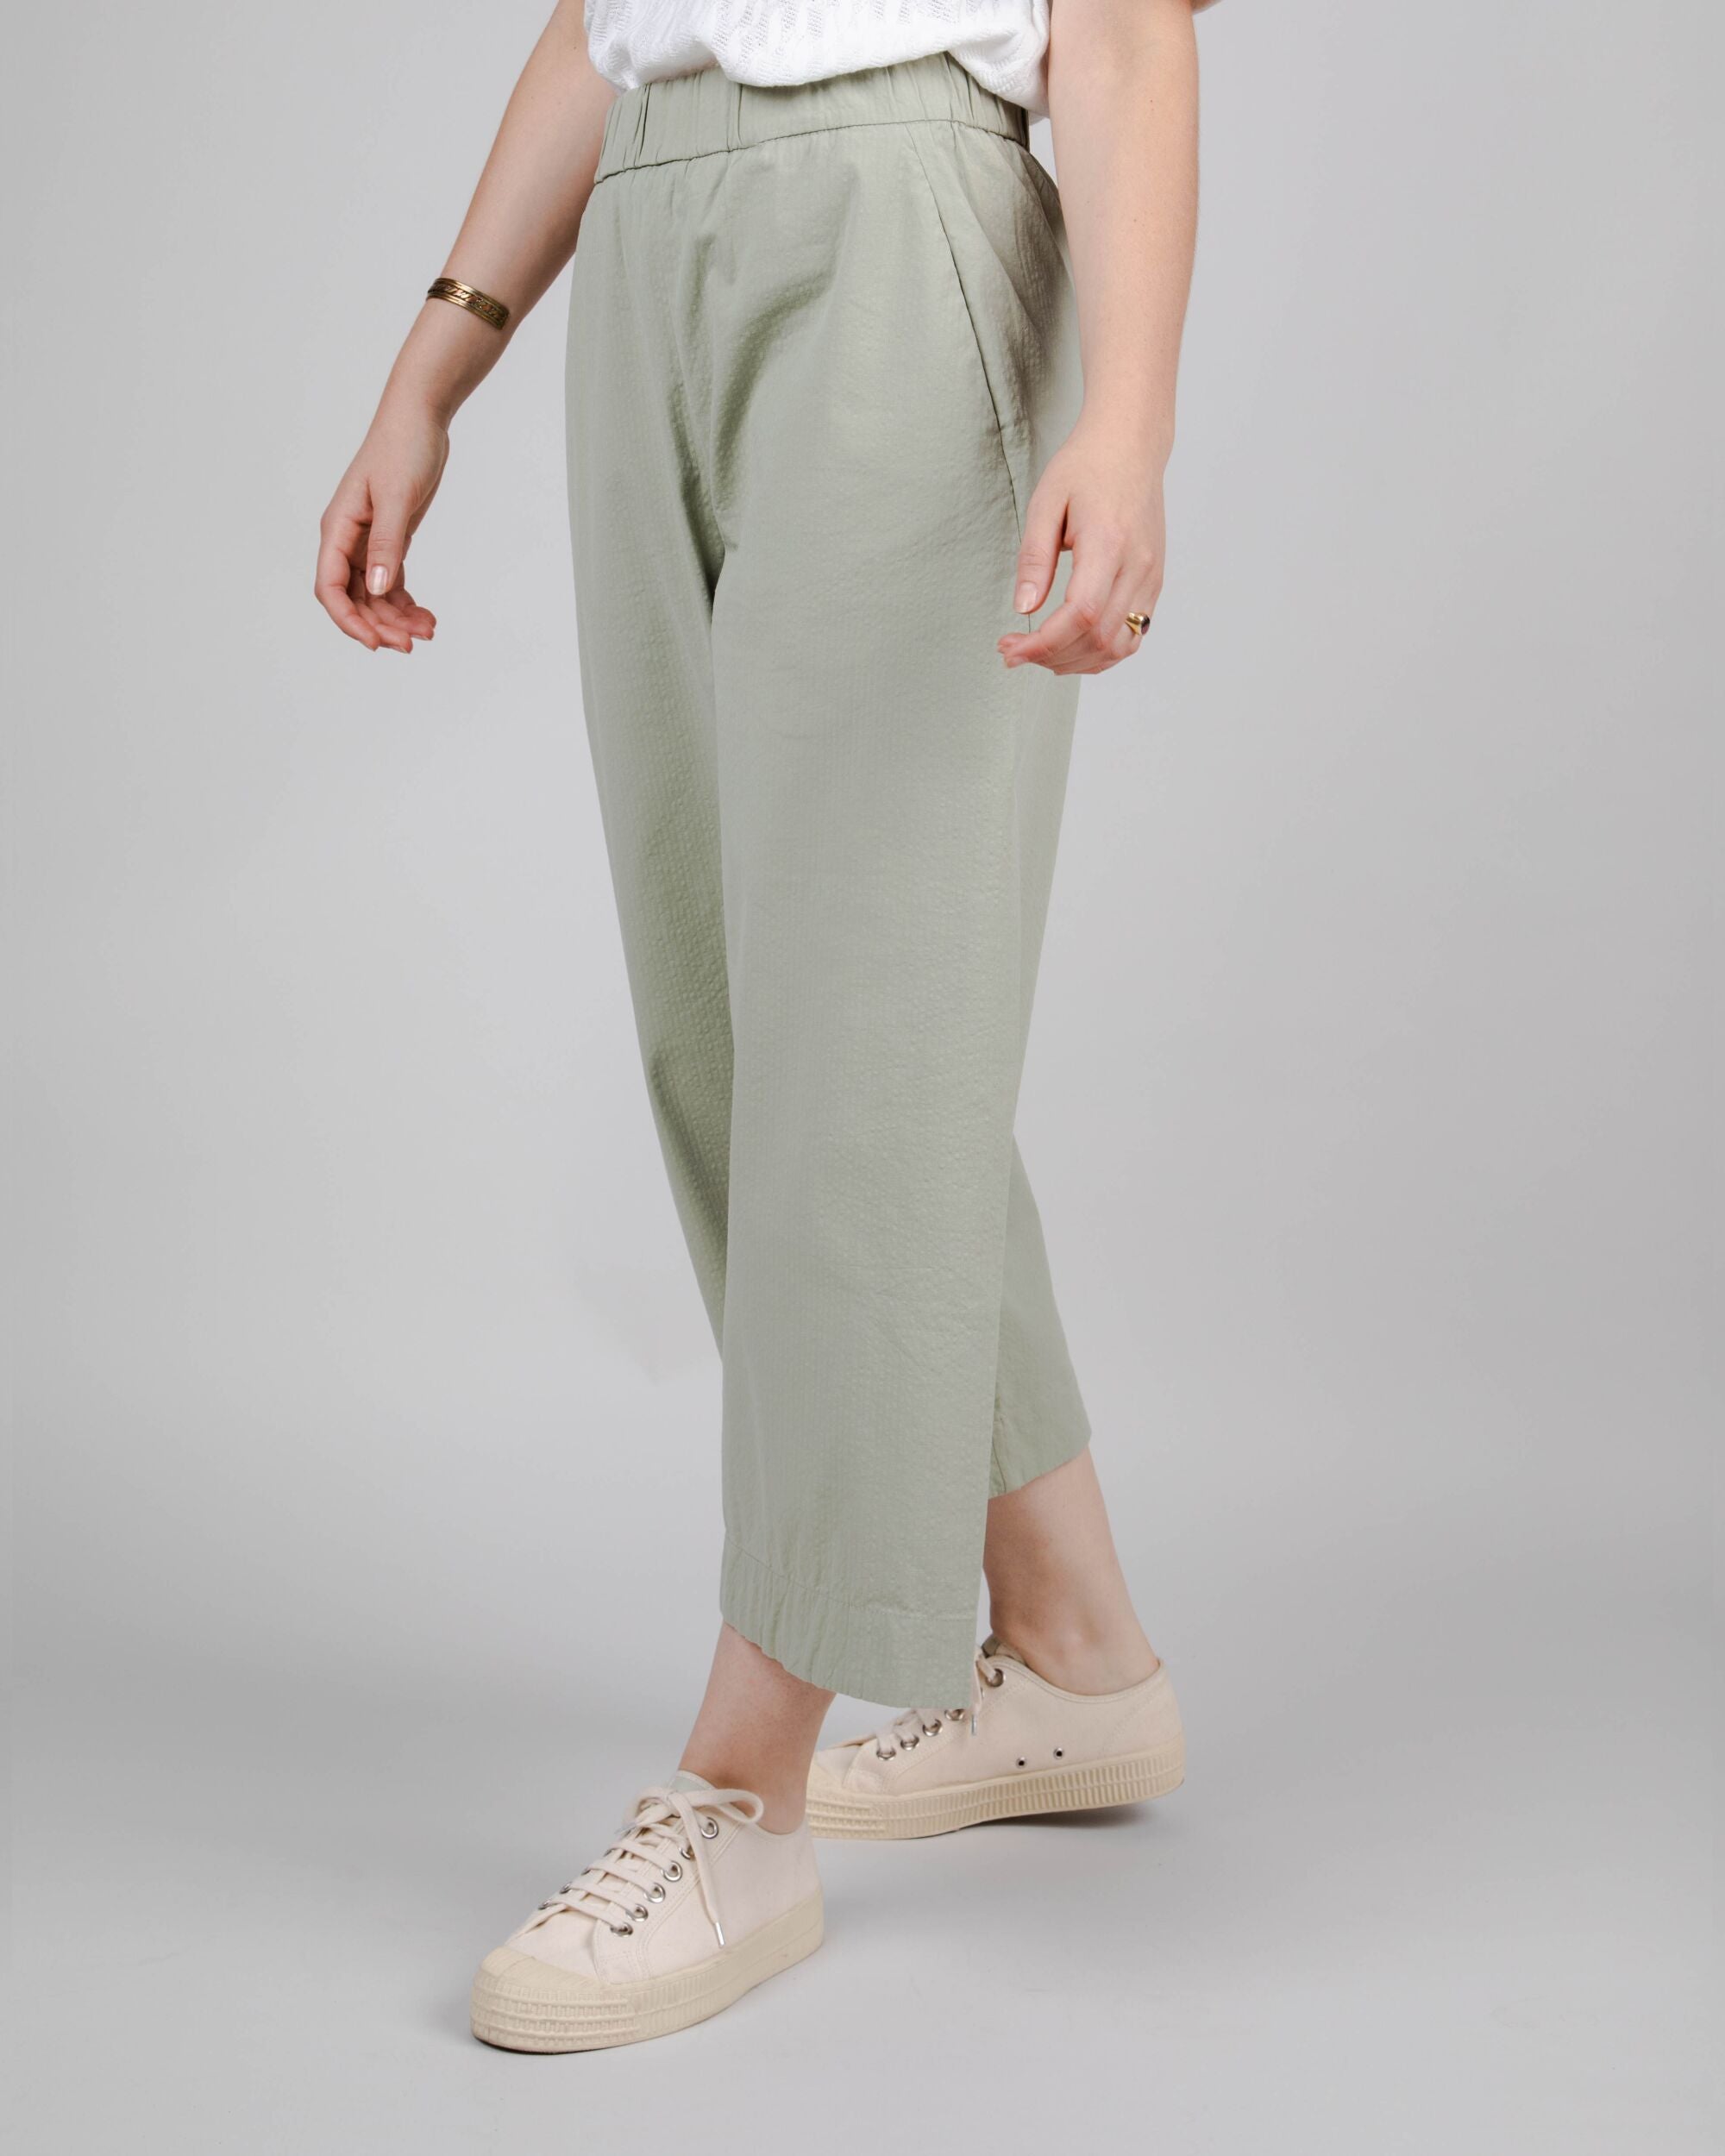 Organic Cotton Pants for Women, Ethical & Eco